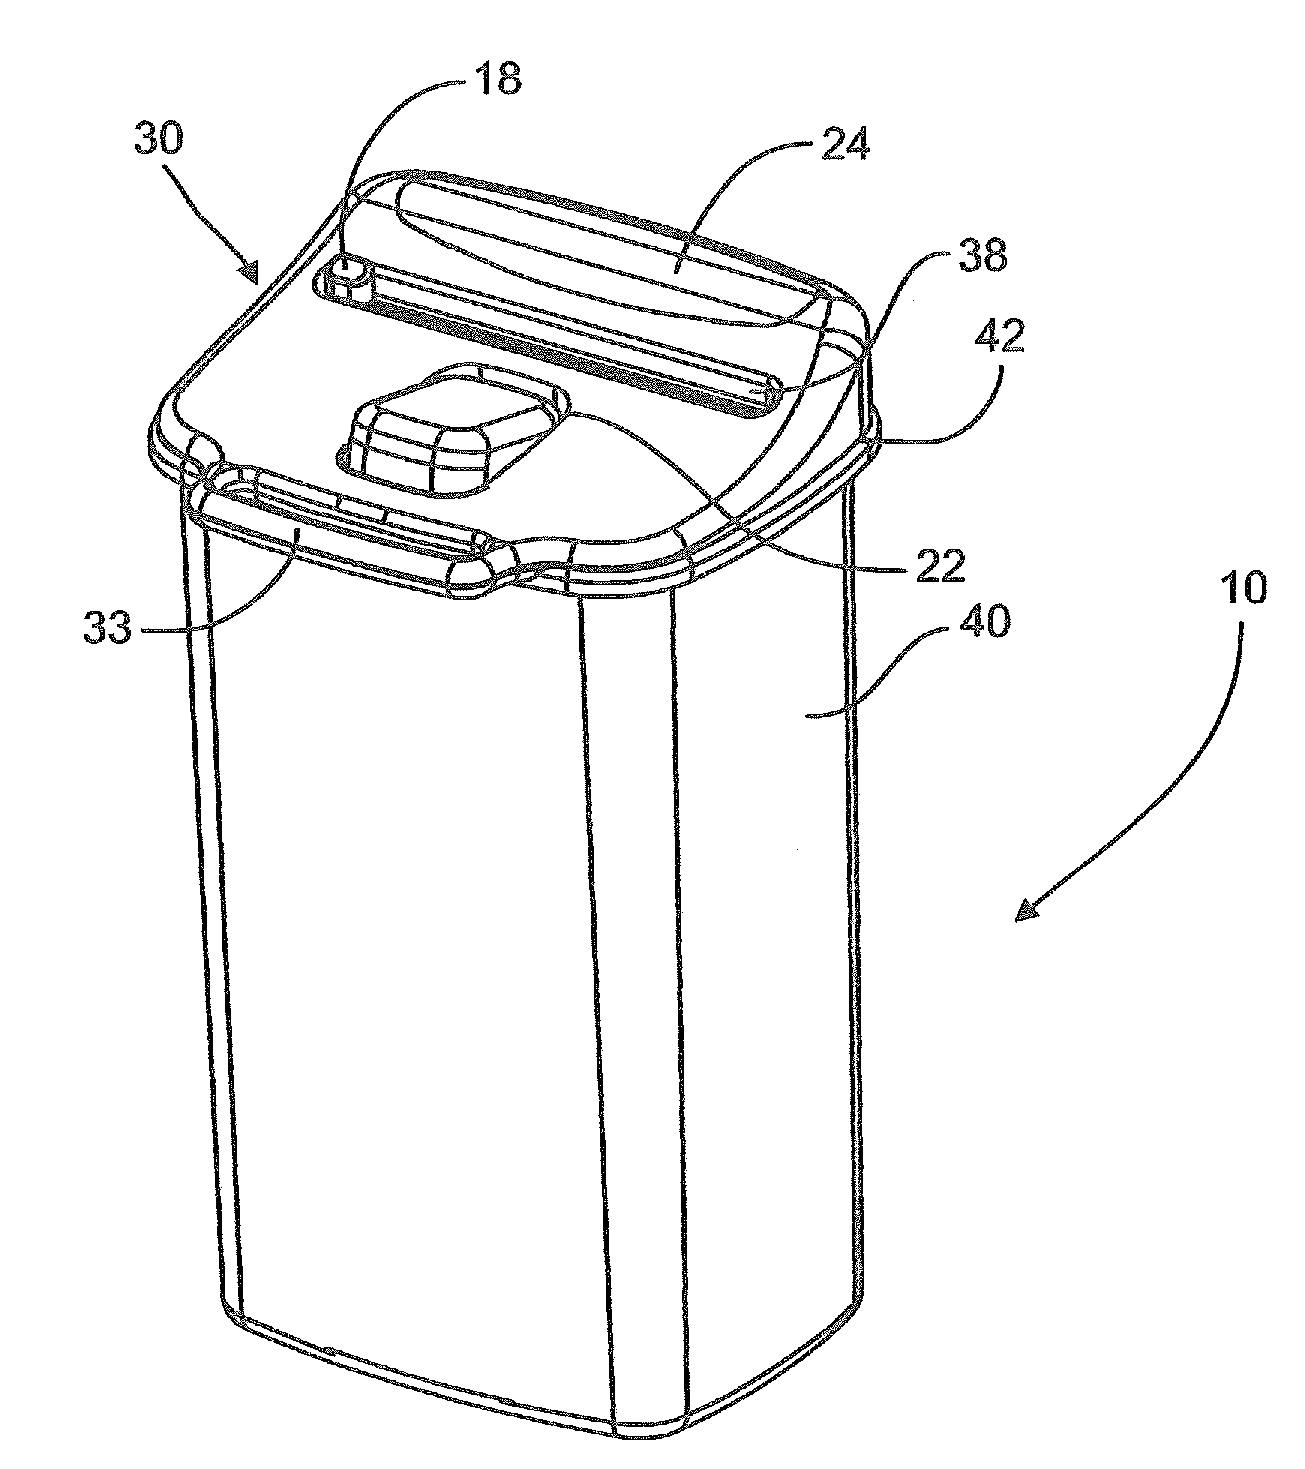 Refuse disposal apparatus and methods of using same